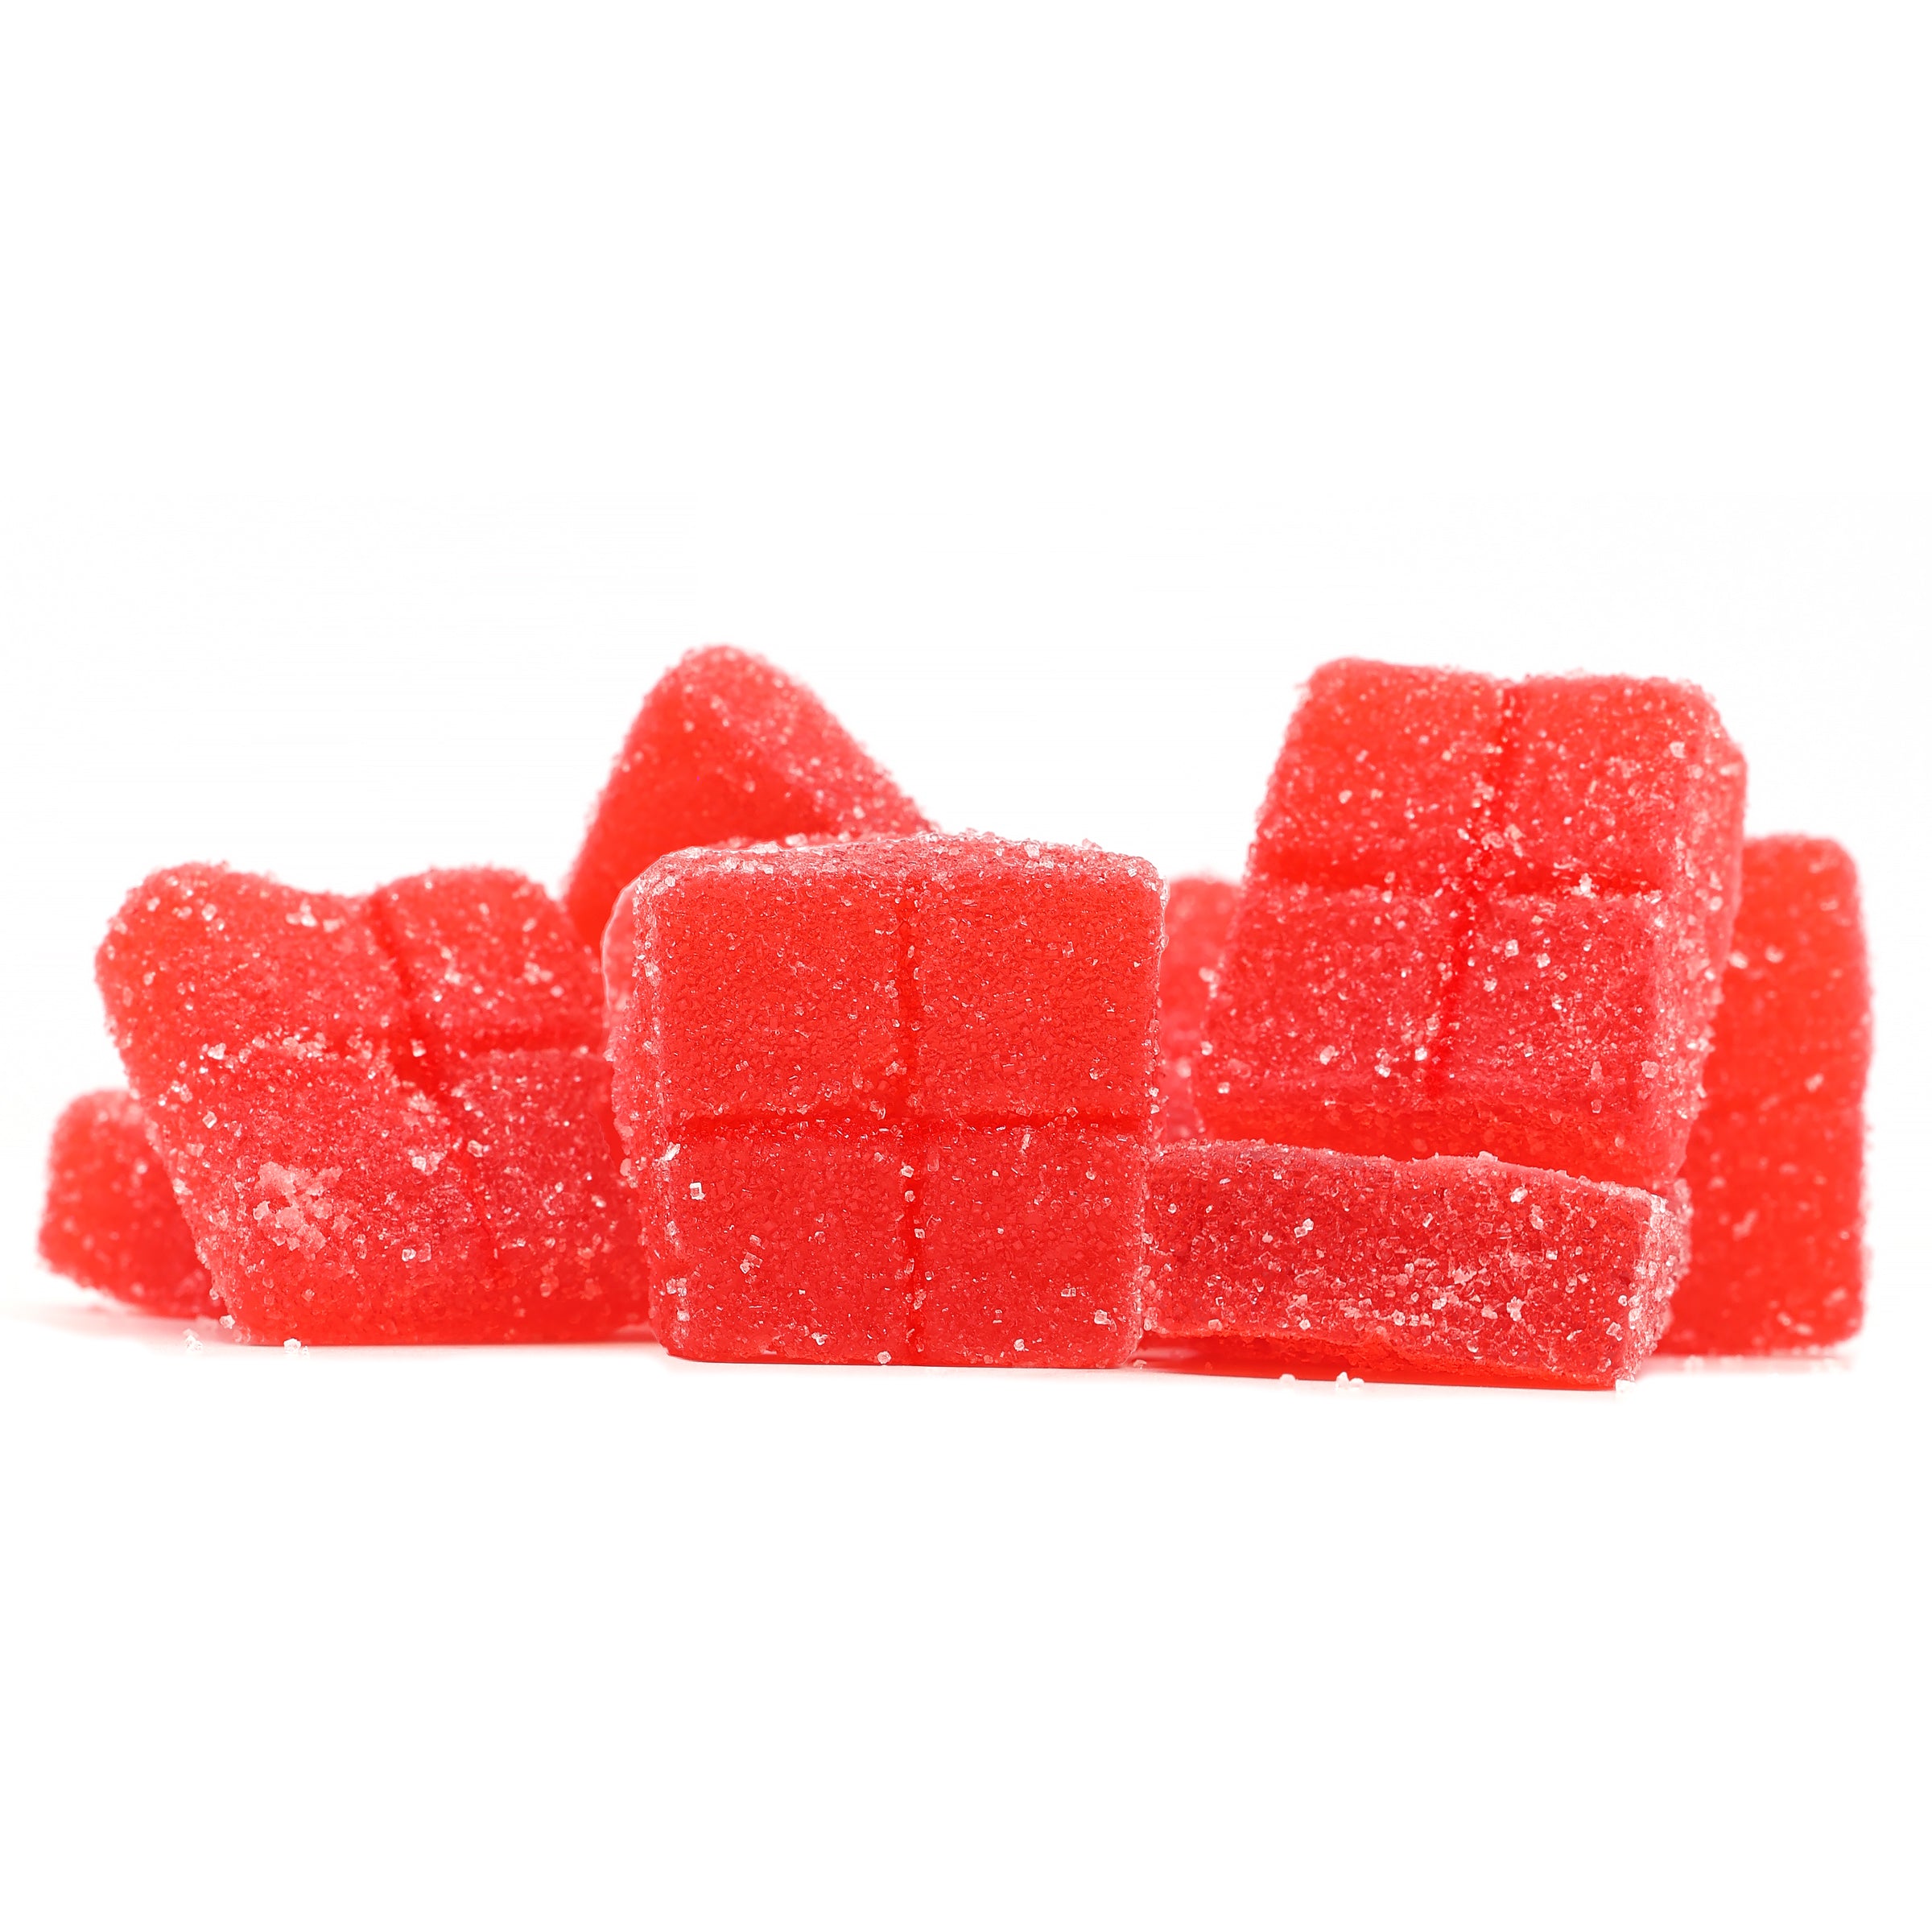 Pineapple Delta-9 THC Gummies: 10 Pack from Botany Farms